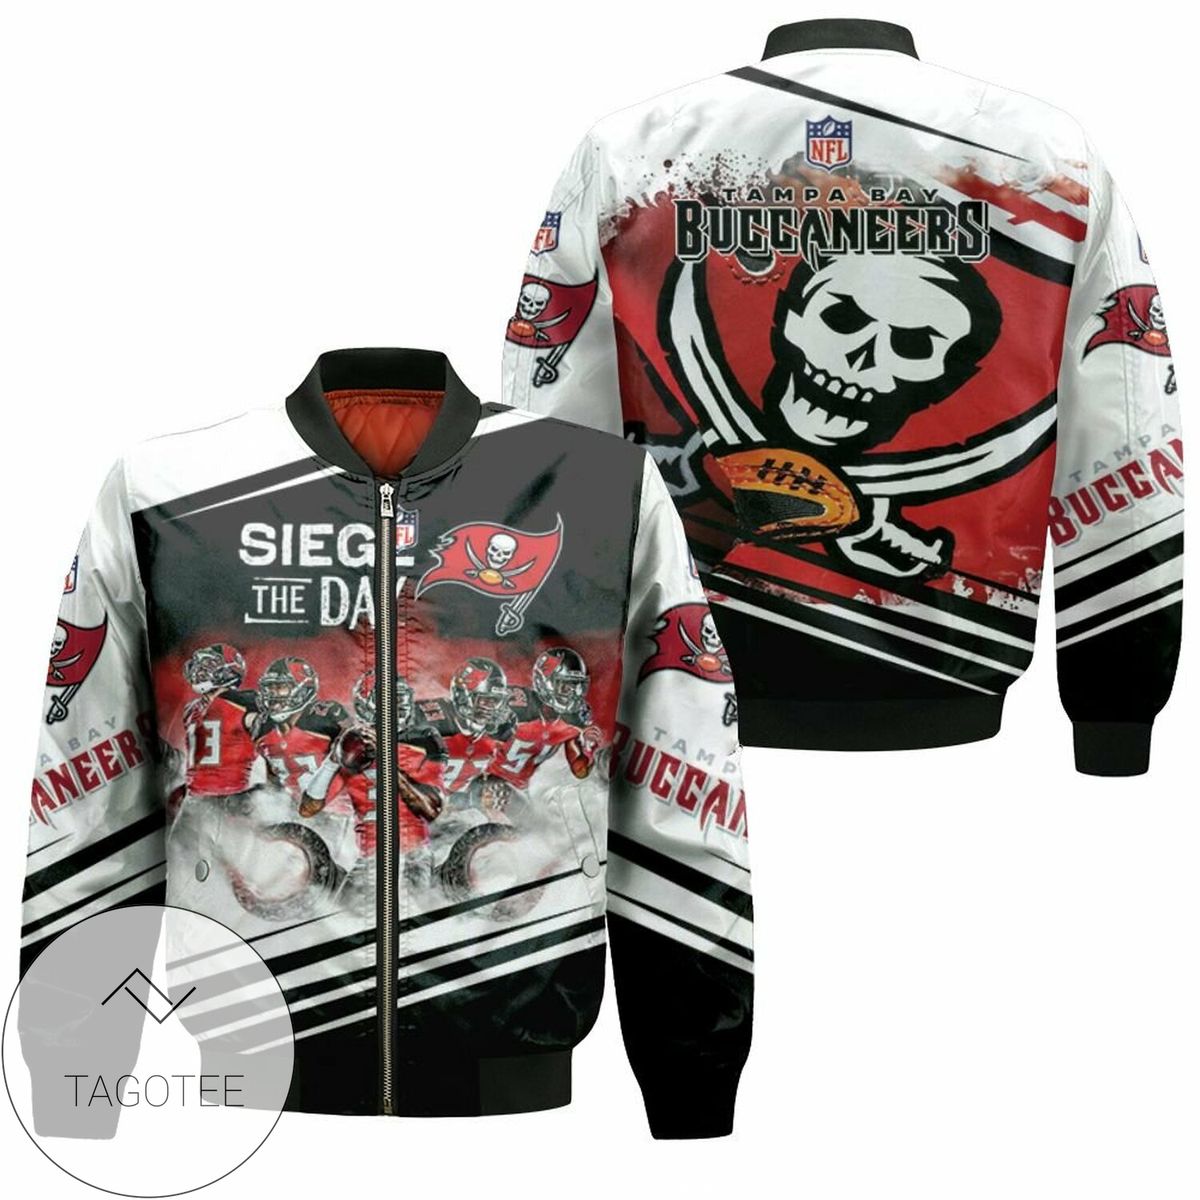 Tampa Bay Buccaneers Siege The Day Nfc South Division Champions Super Bowl 2021 (2) Bomber Jacket